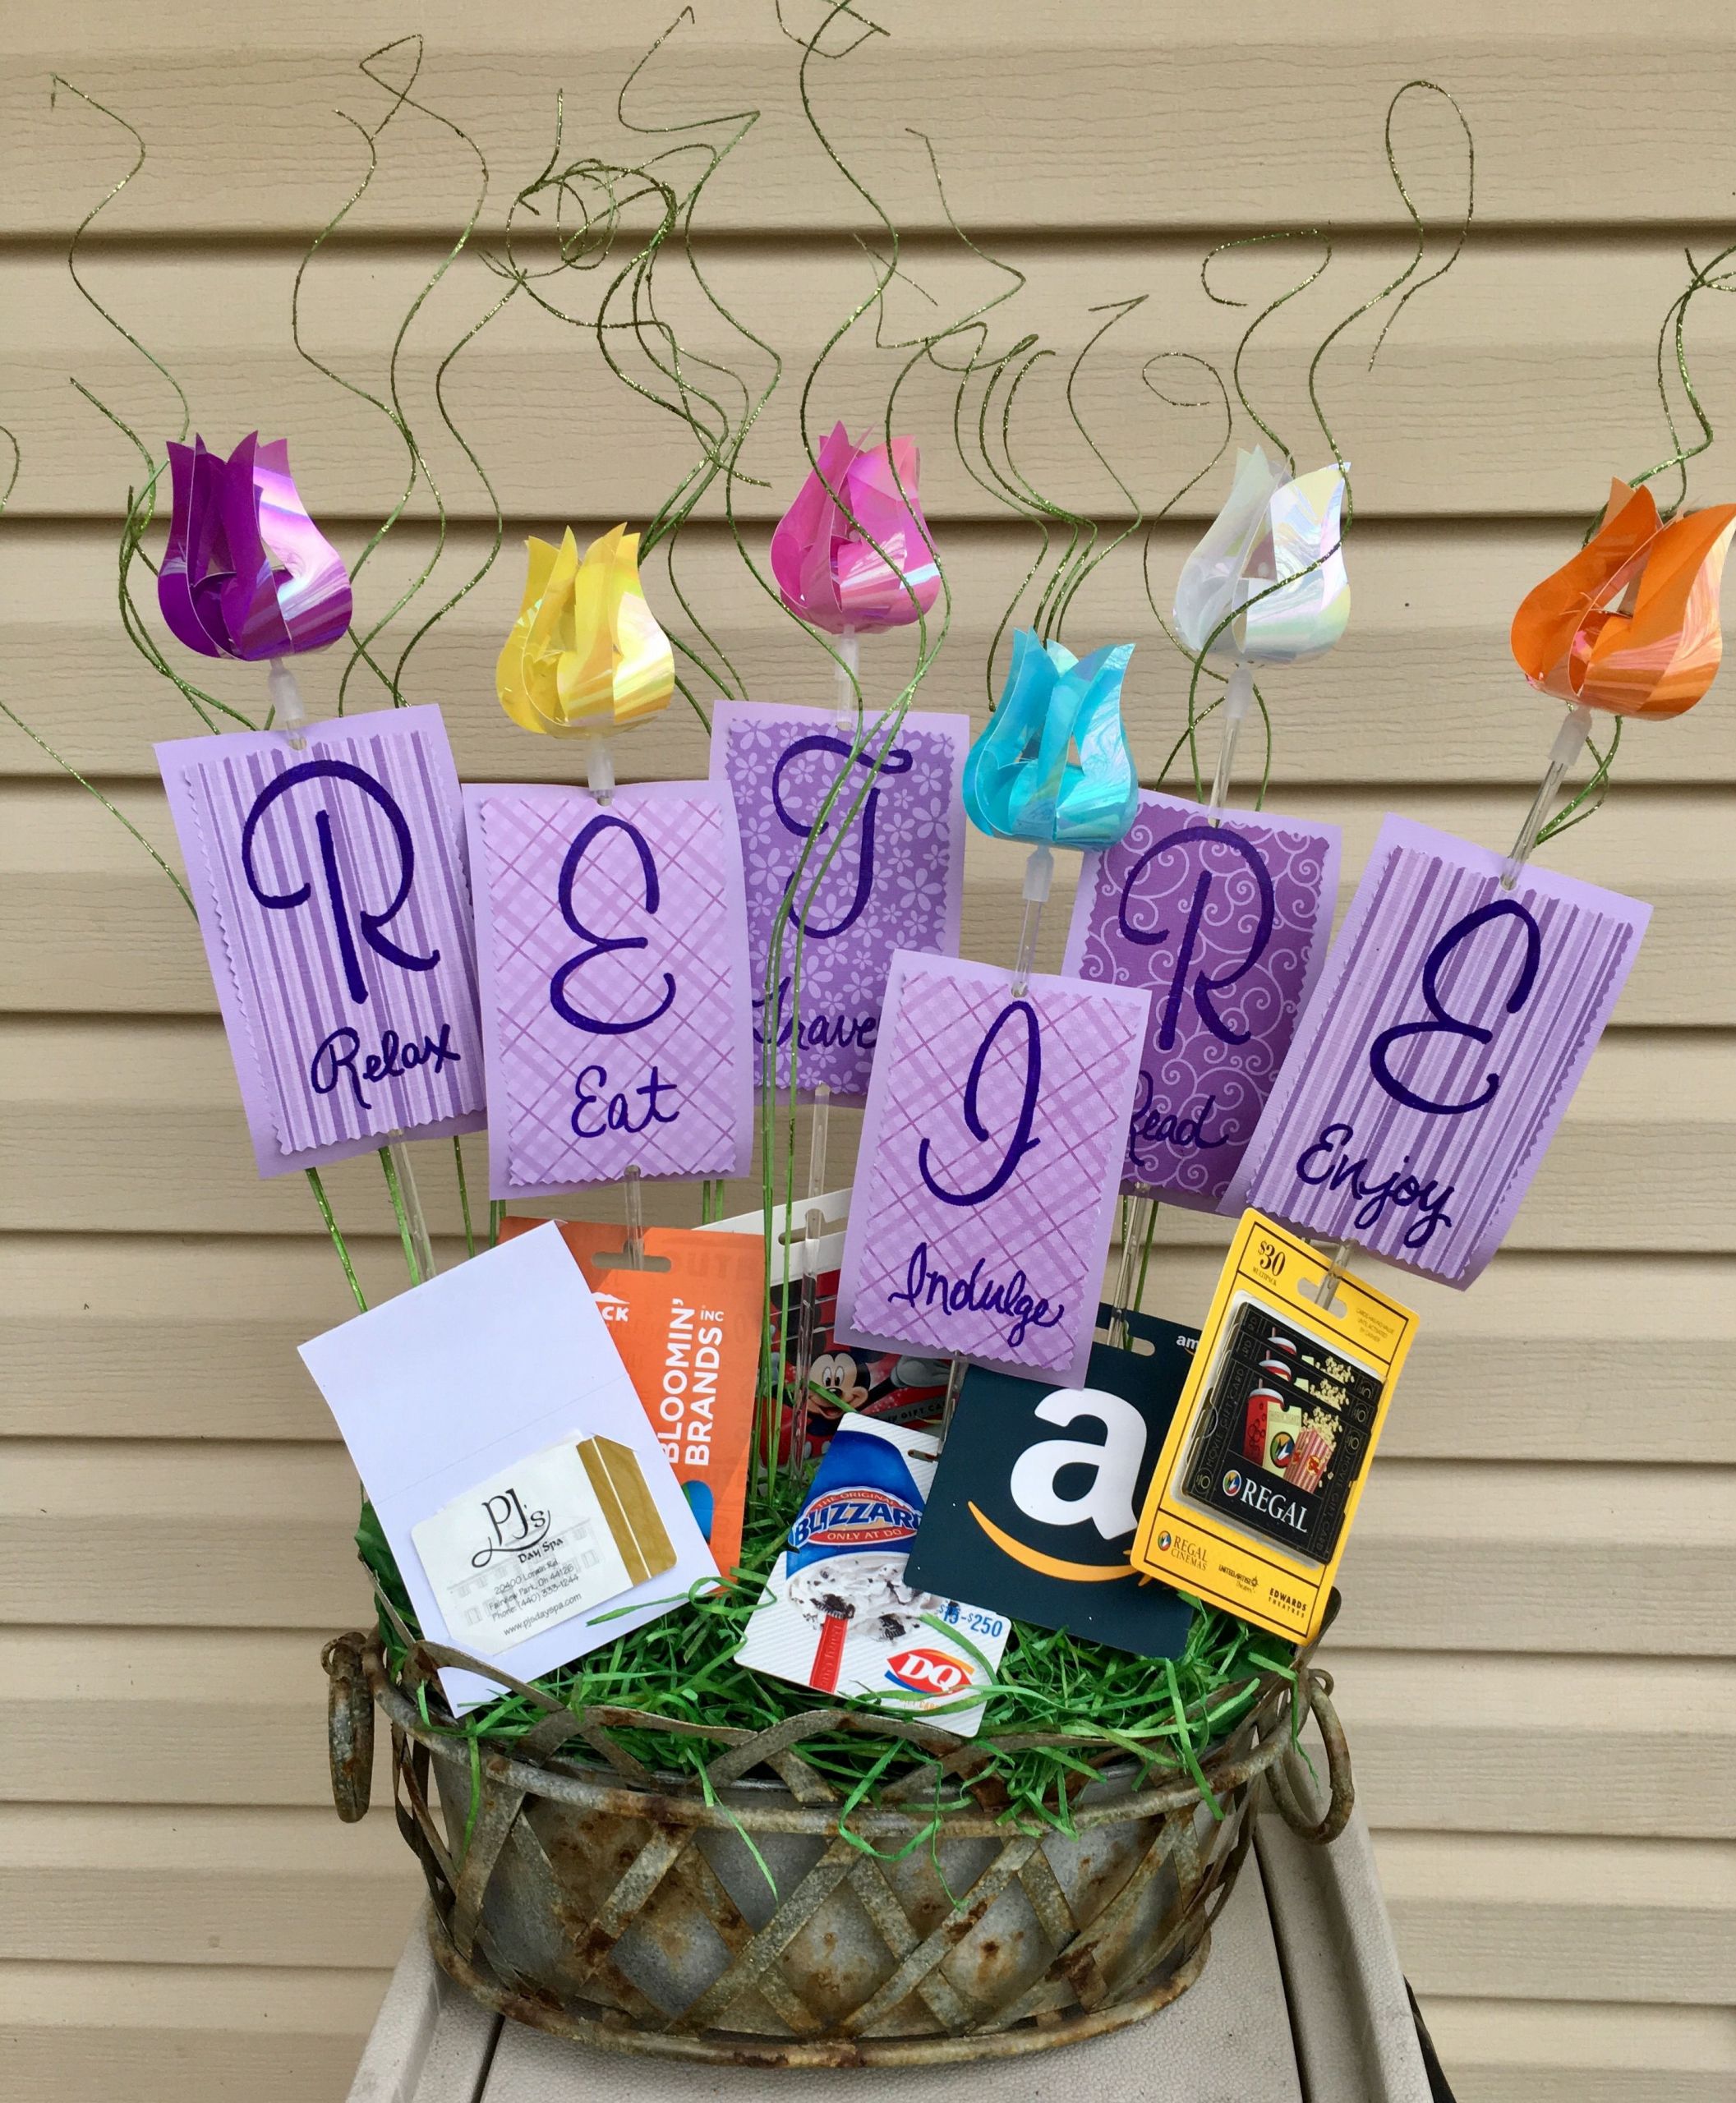 Funny Teacher Retirement Party Ideas
 Retirement t basket with t cards Relax Eat Travel